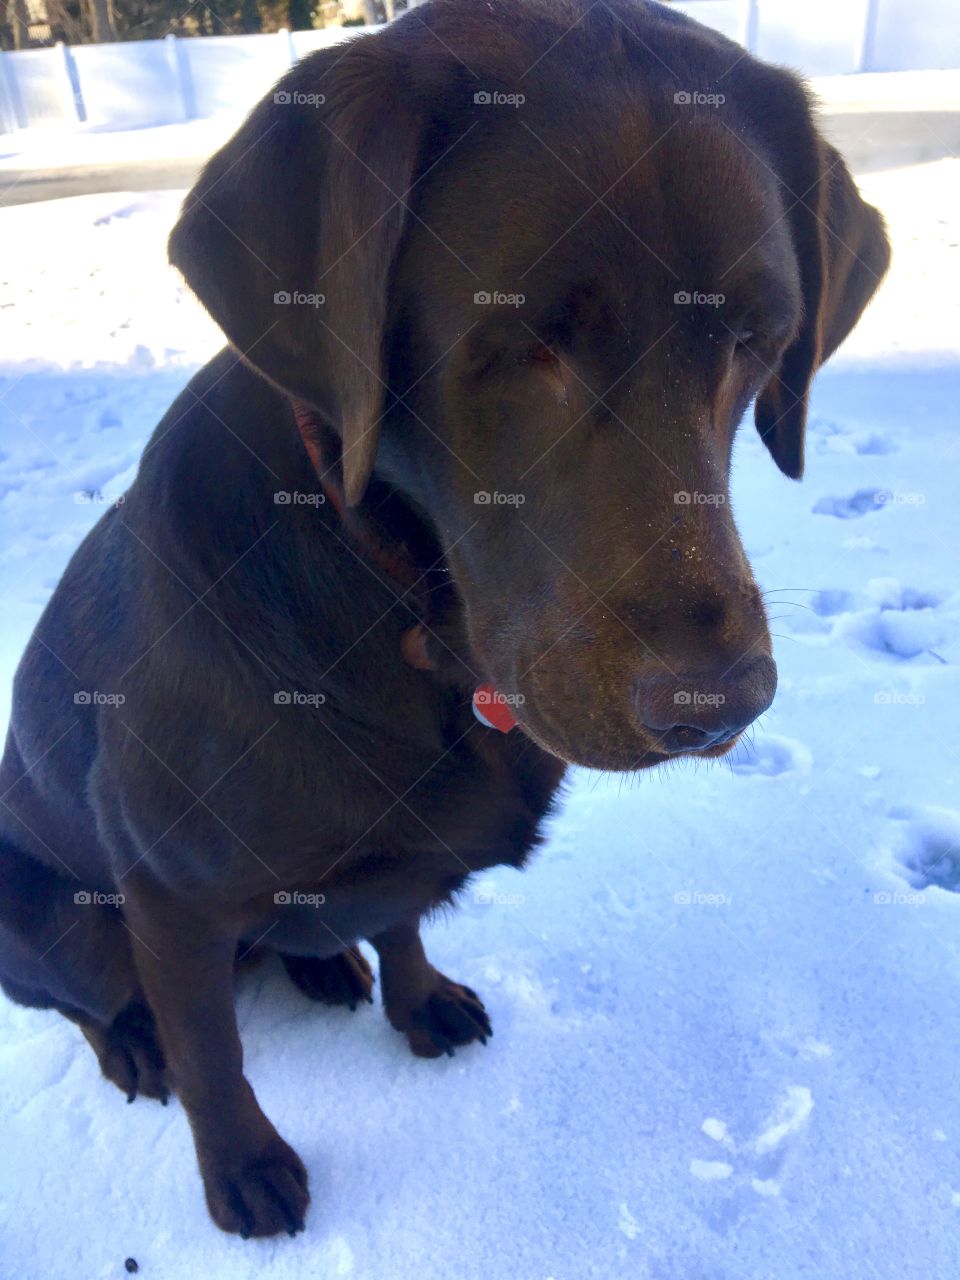 Snow and a chocolate lab